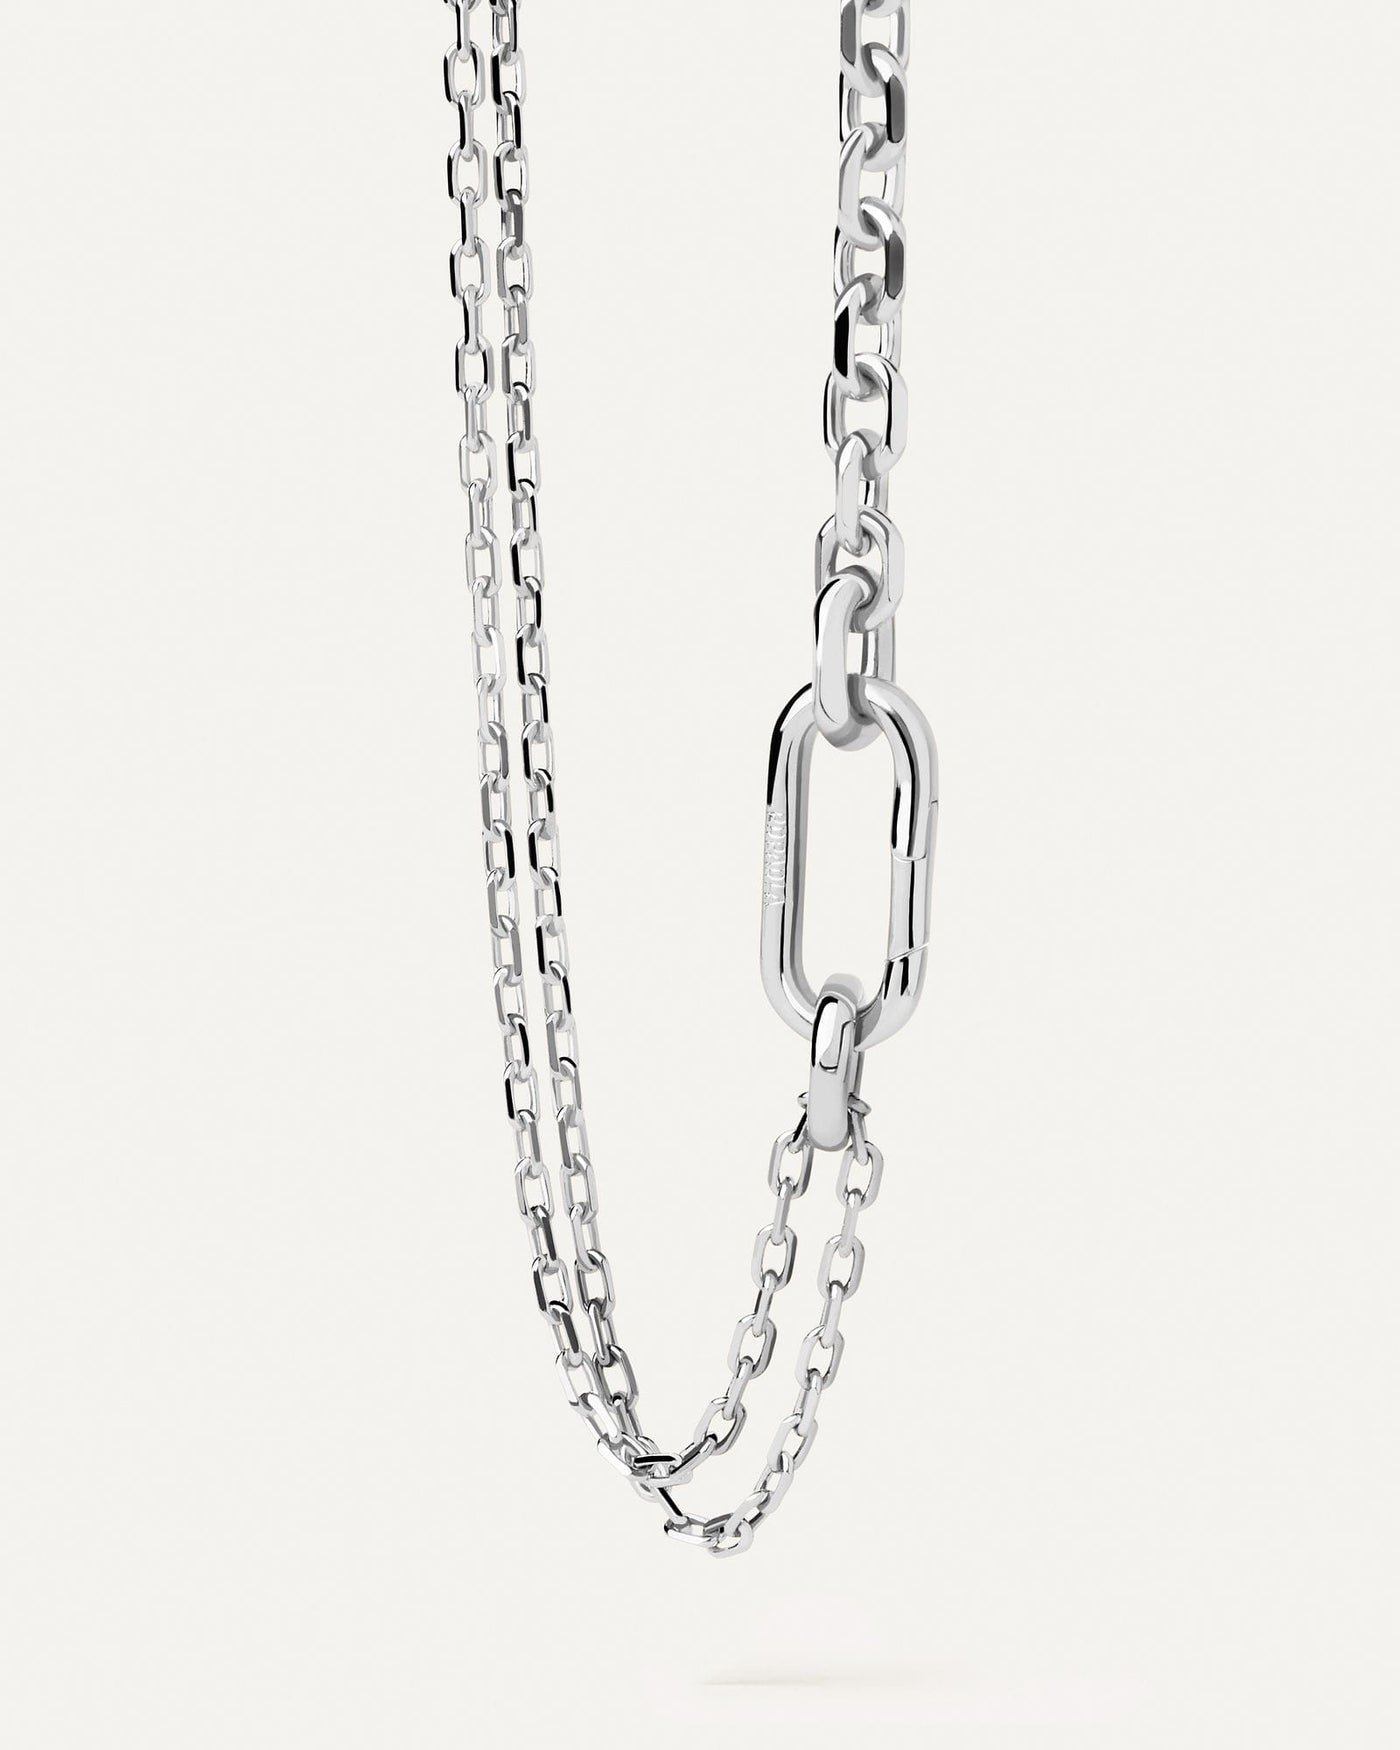 2024 Selection | Vesta Silver Chain Necklace. Double chain silver necklace with bold clasp and asymmetrical links. Get the latest arrival from PDPAOLA. Place your order safely and get this Best Seller. Free Shipping.